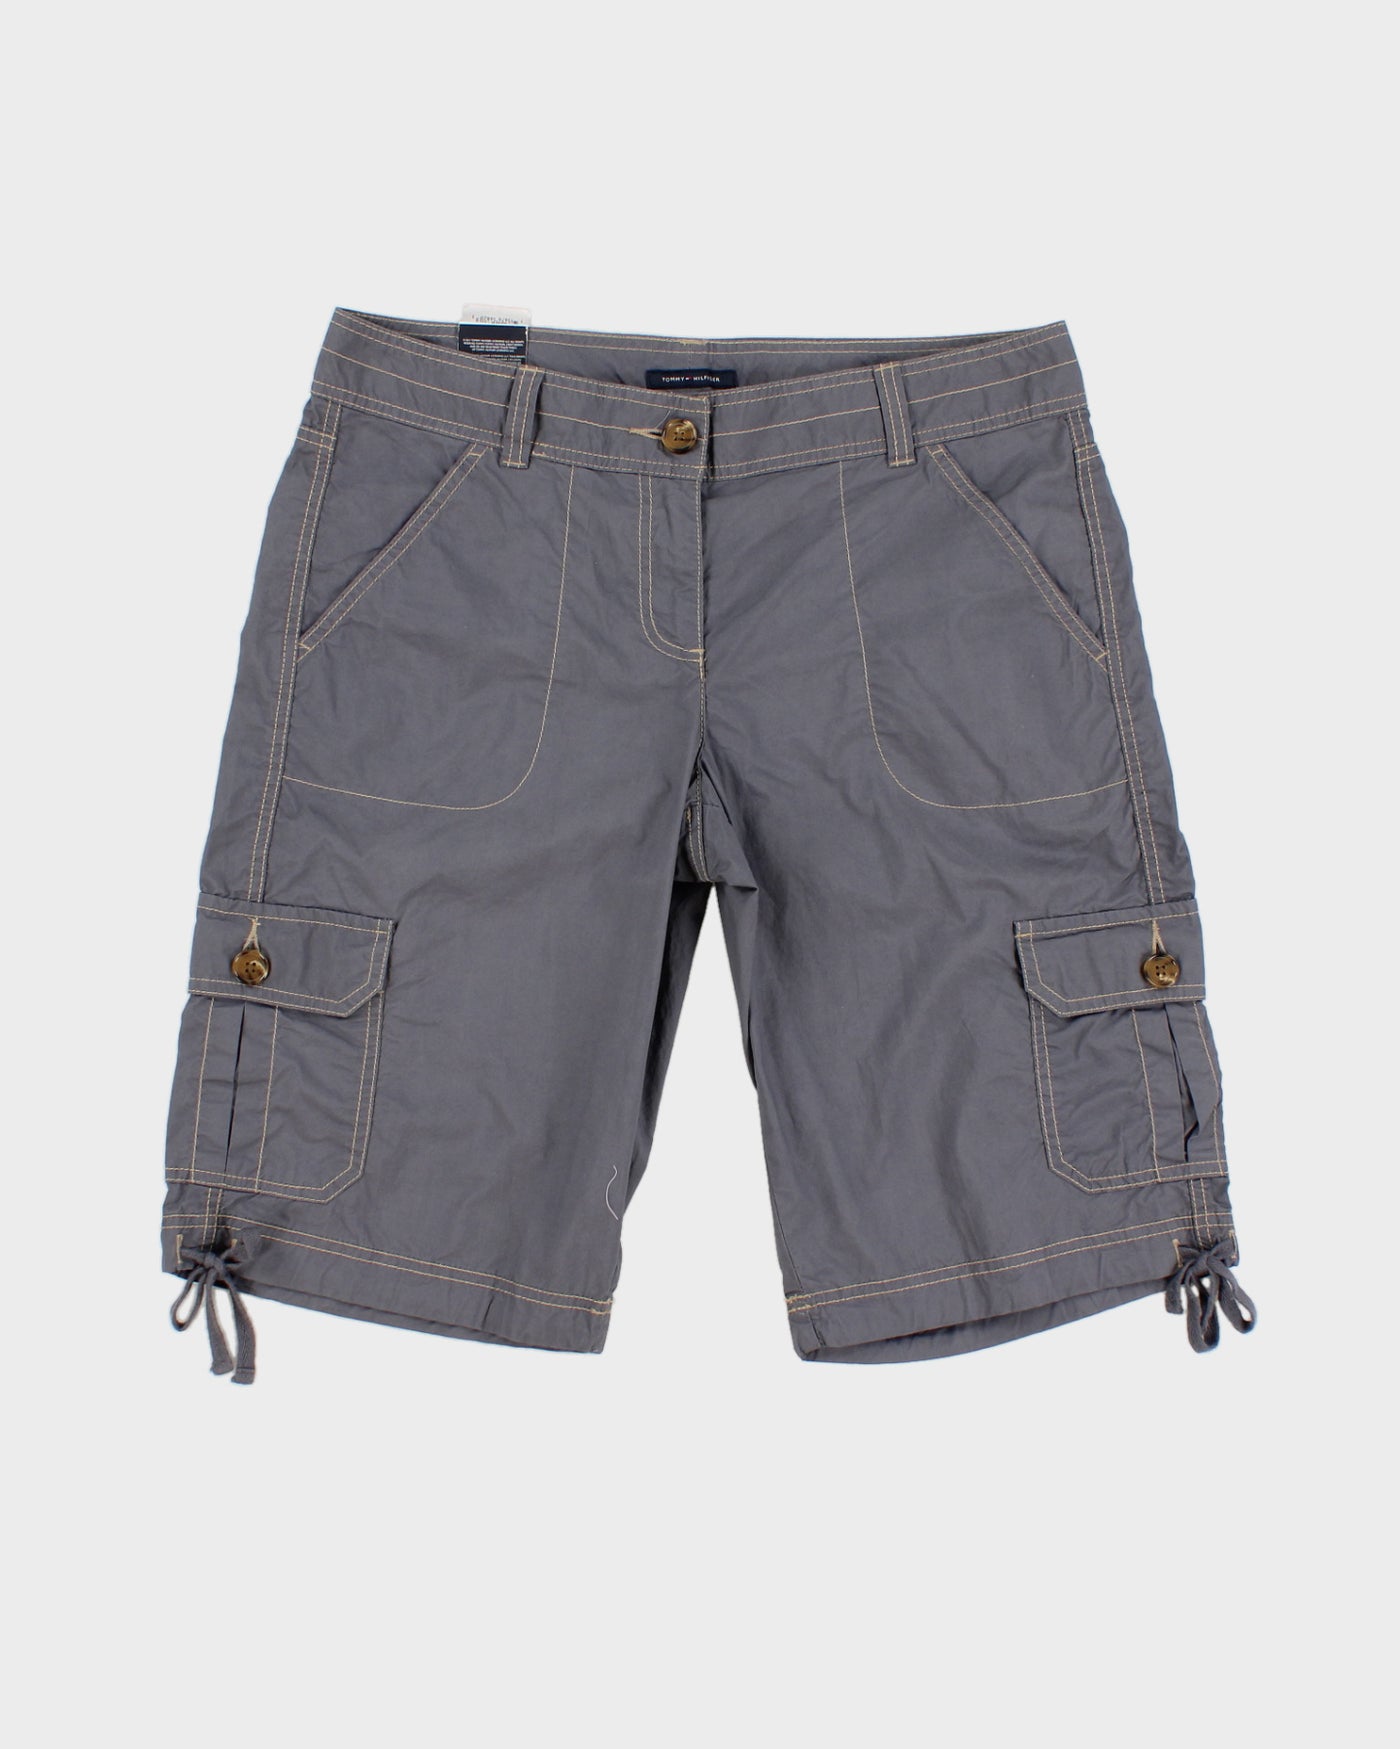 Deadstock Tommy Hilfiger Cargo Shorts - M